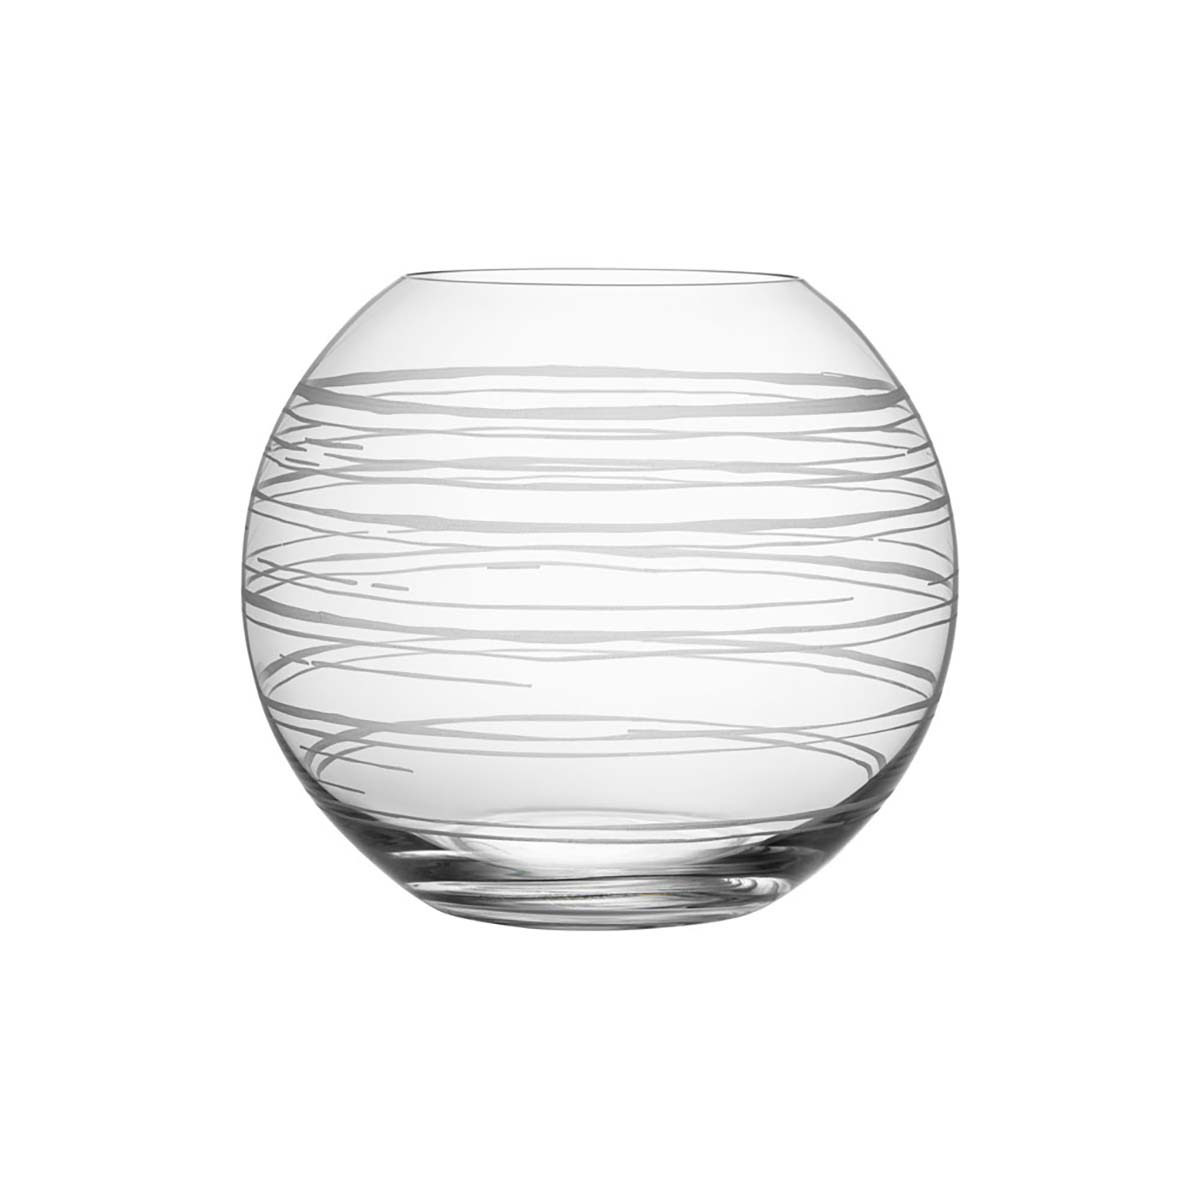 Orrefors Crystal, 8.07" Graphic Round Vase